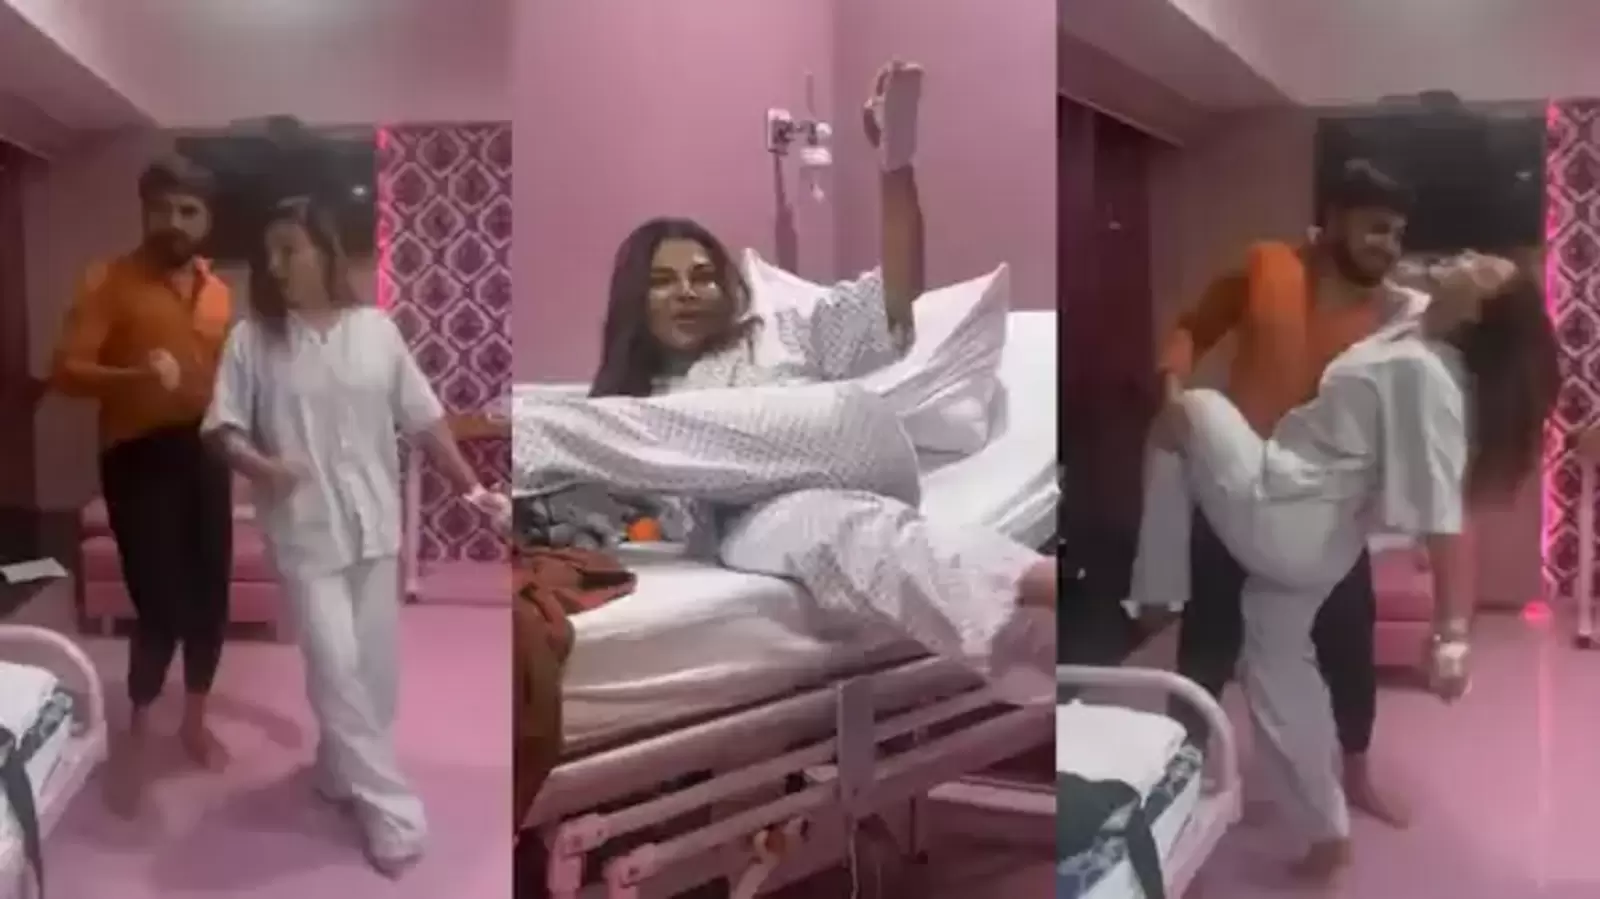 Rakhixvideo - Rakhi Sawant dances with BF Adil in a hospital room before her 'surgery'.  Watch - Hindustan Times